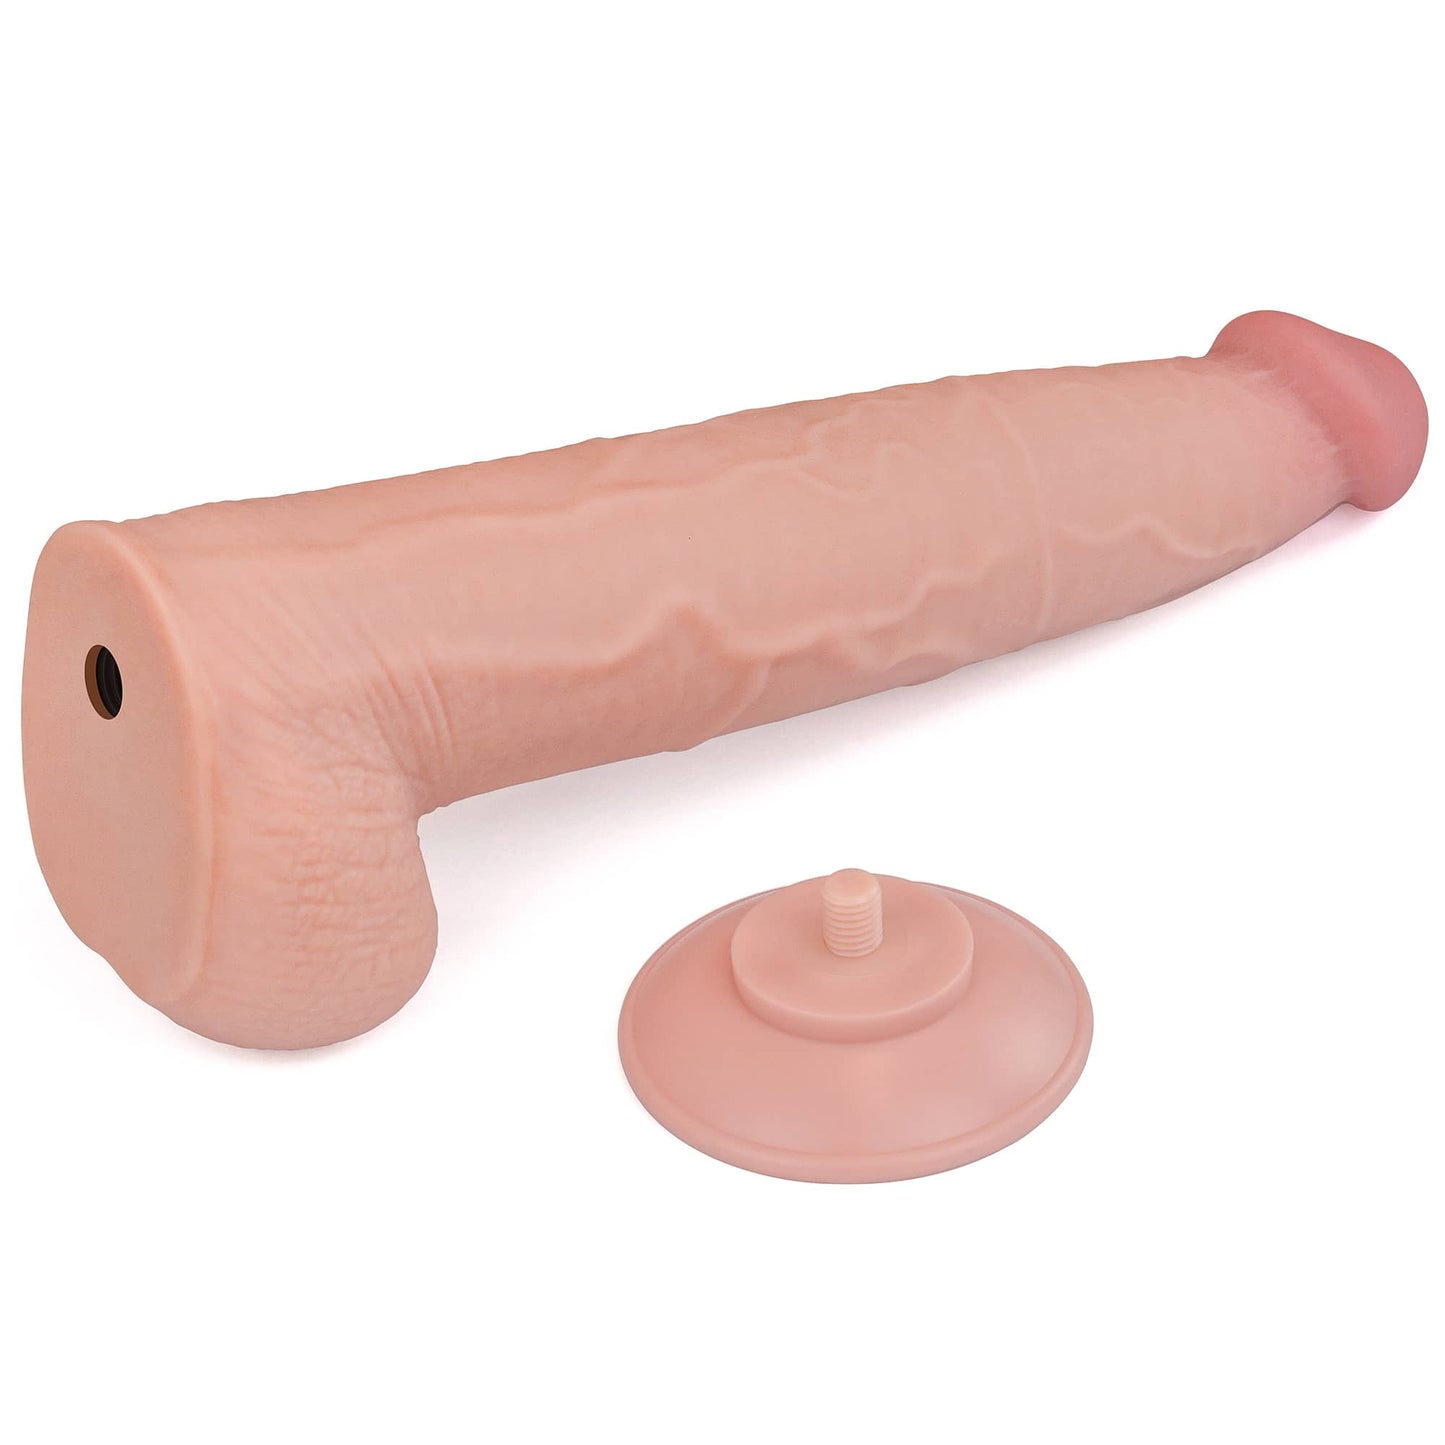 The 13.5 inches huge soft sliding skin dildo laid flat with its suction cup